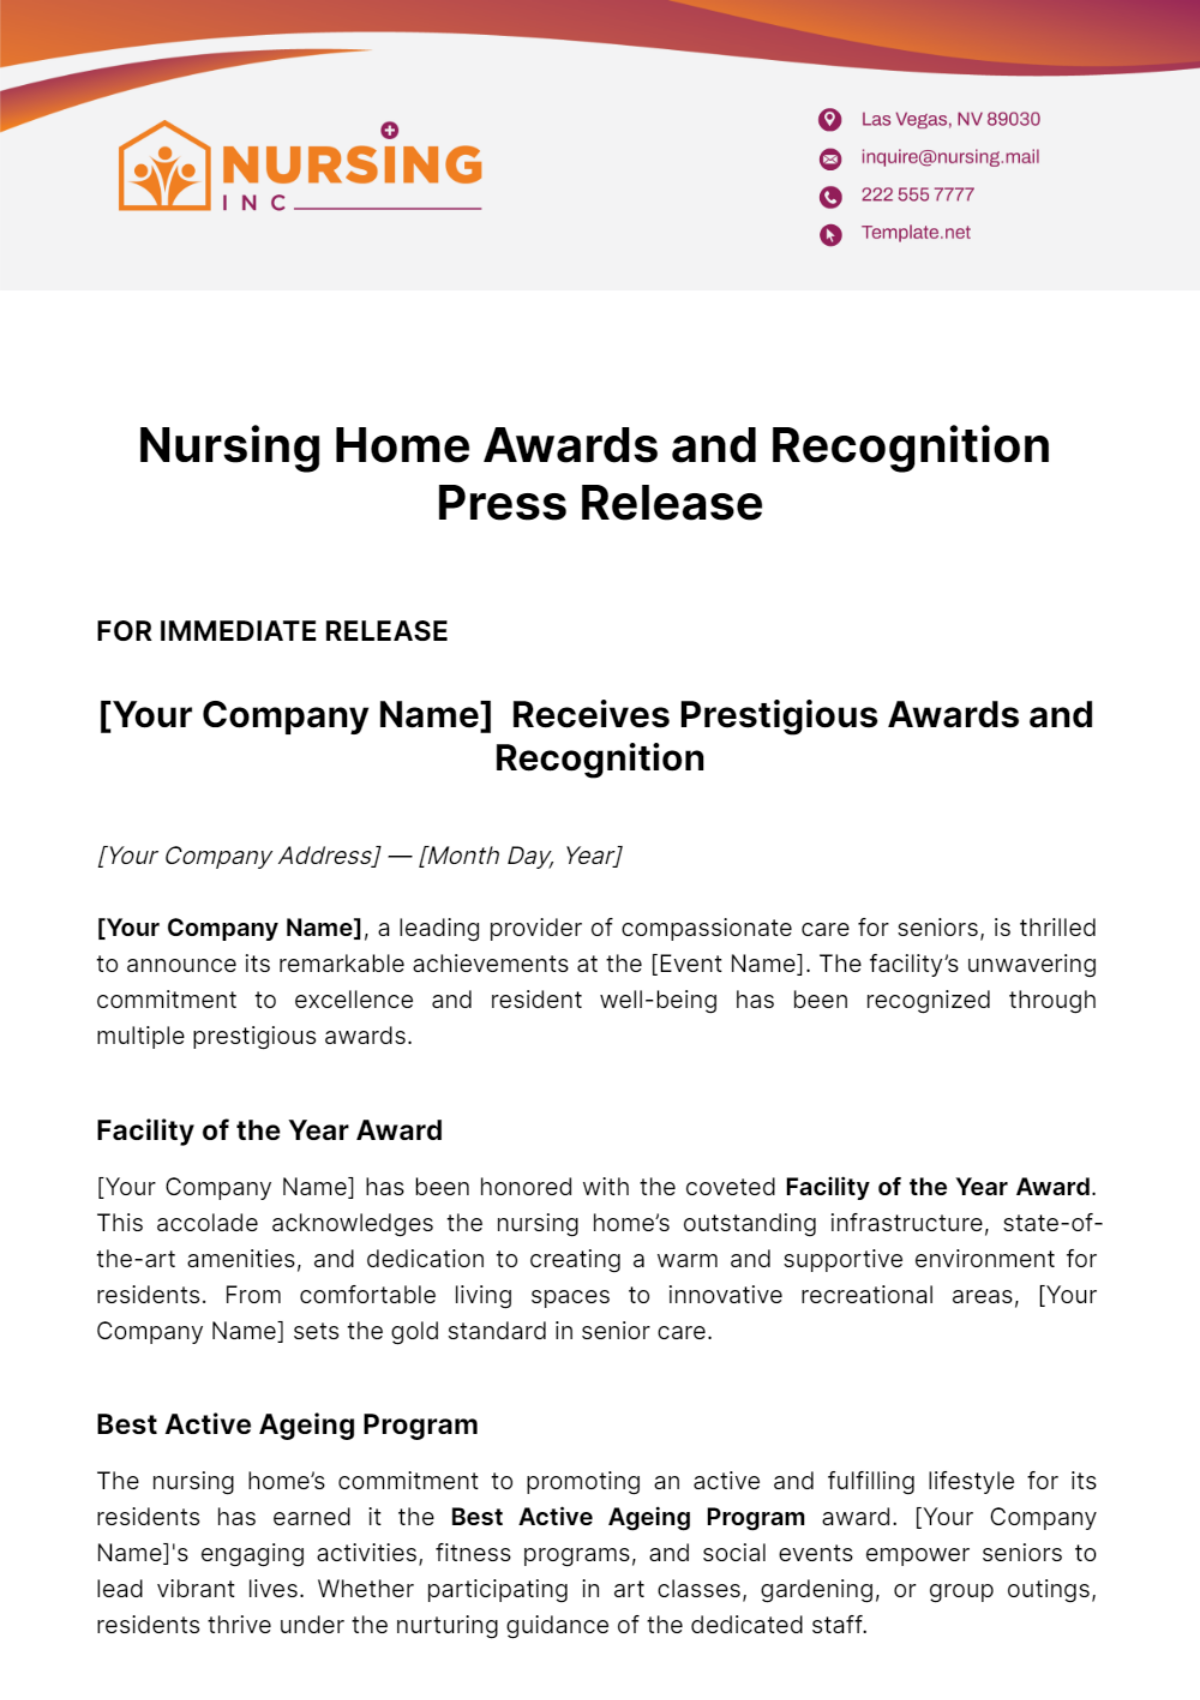 Nursing Home Awards and Recognition Press Release Template